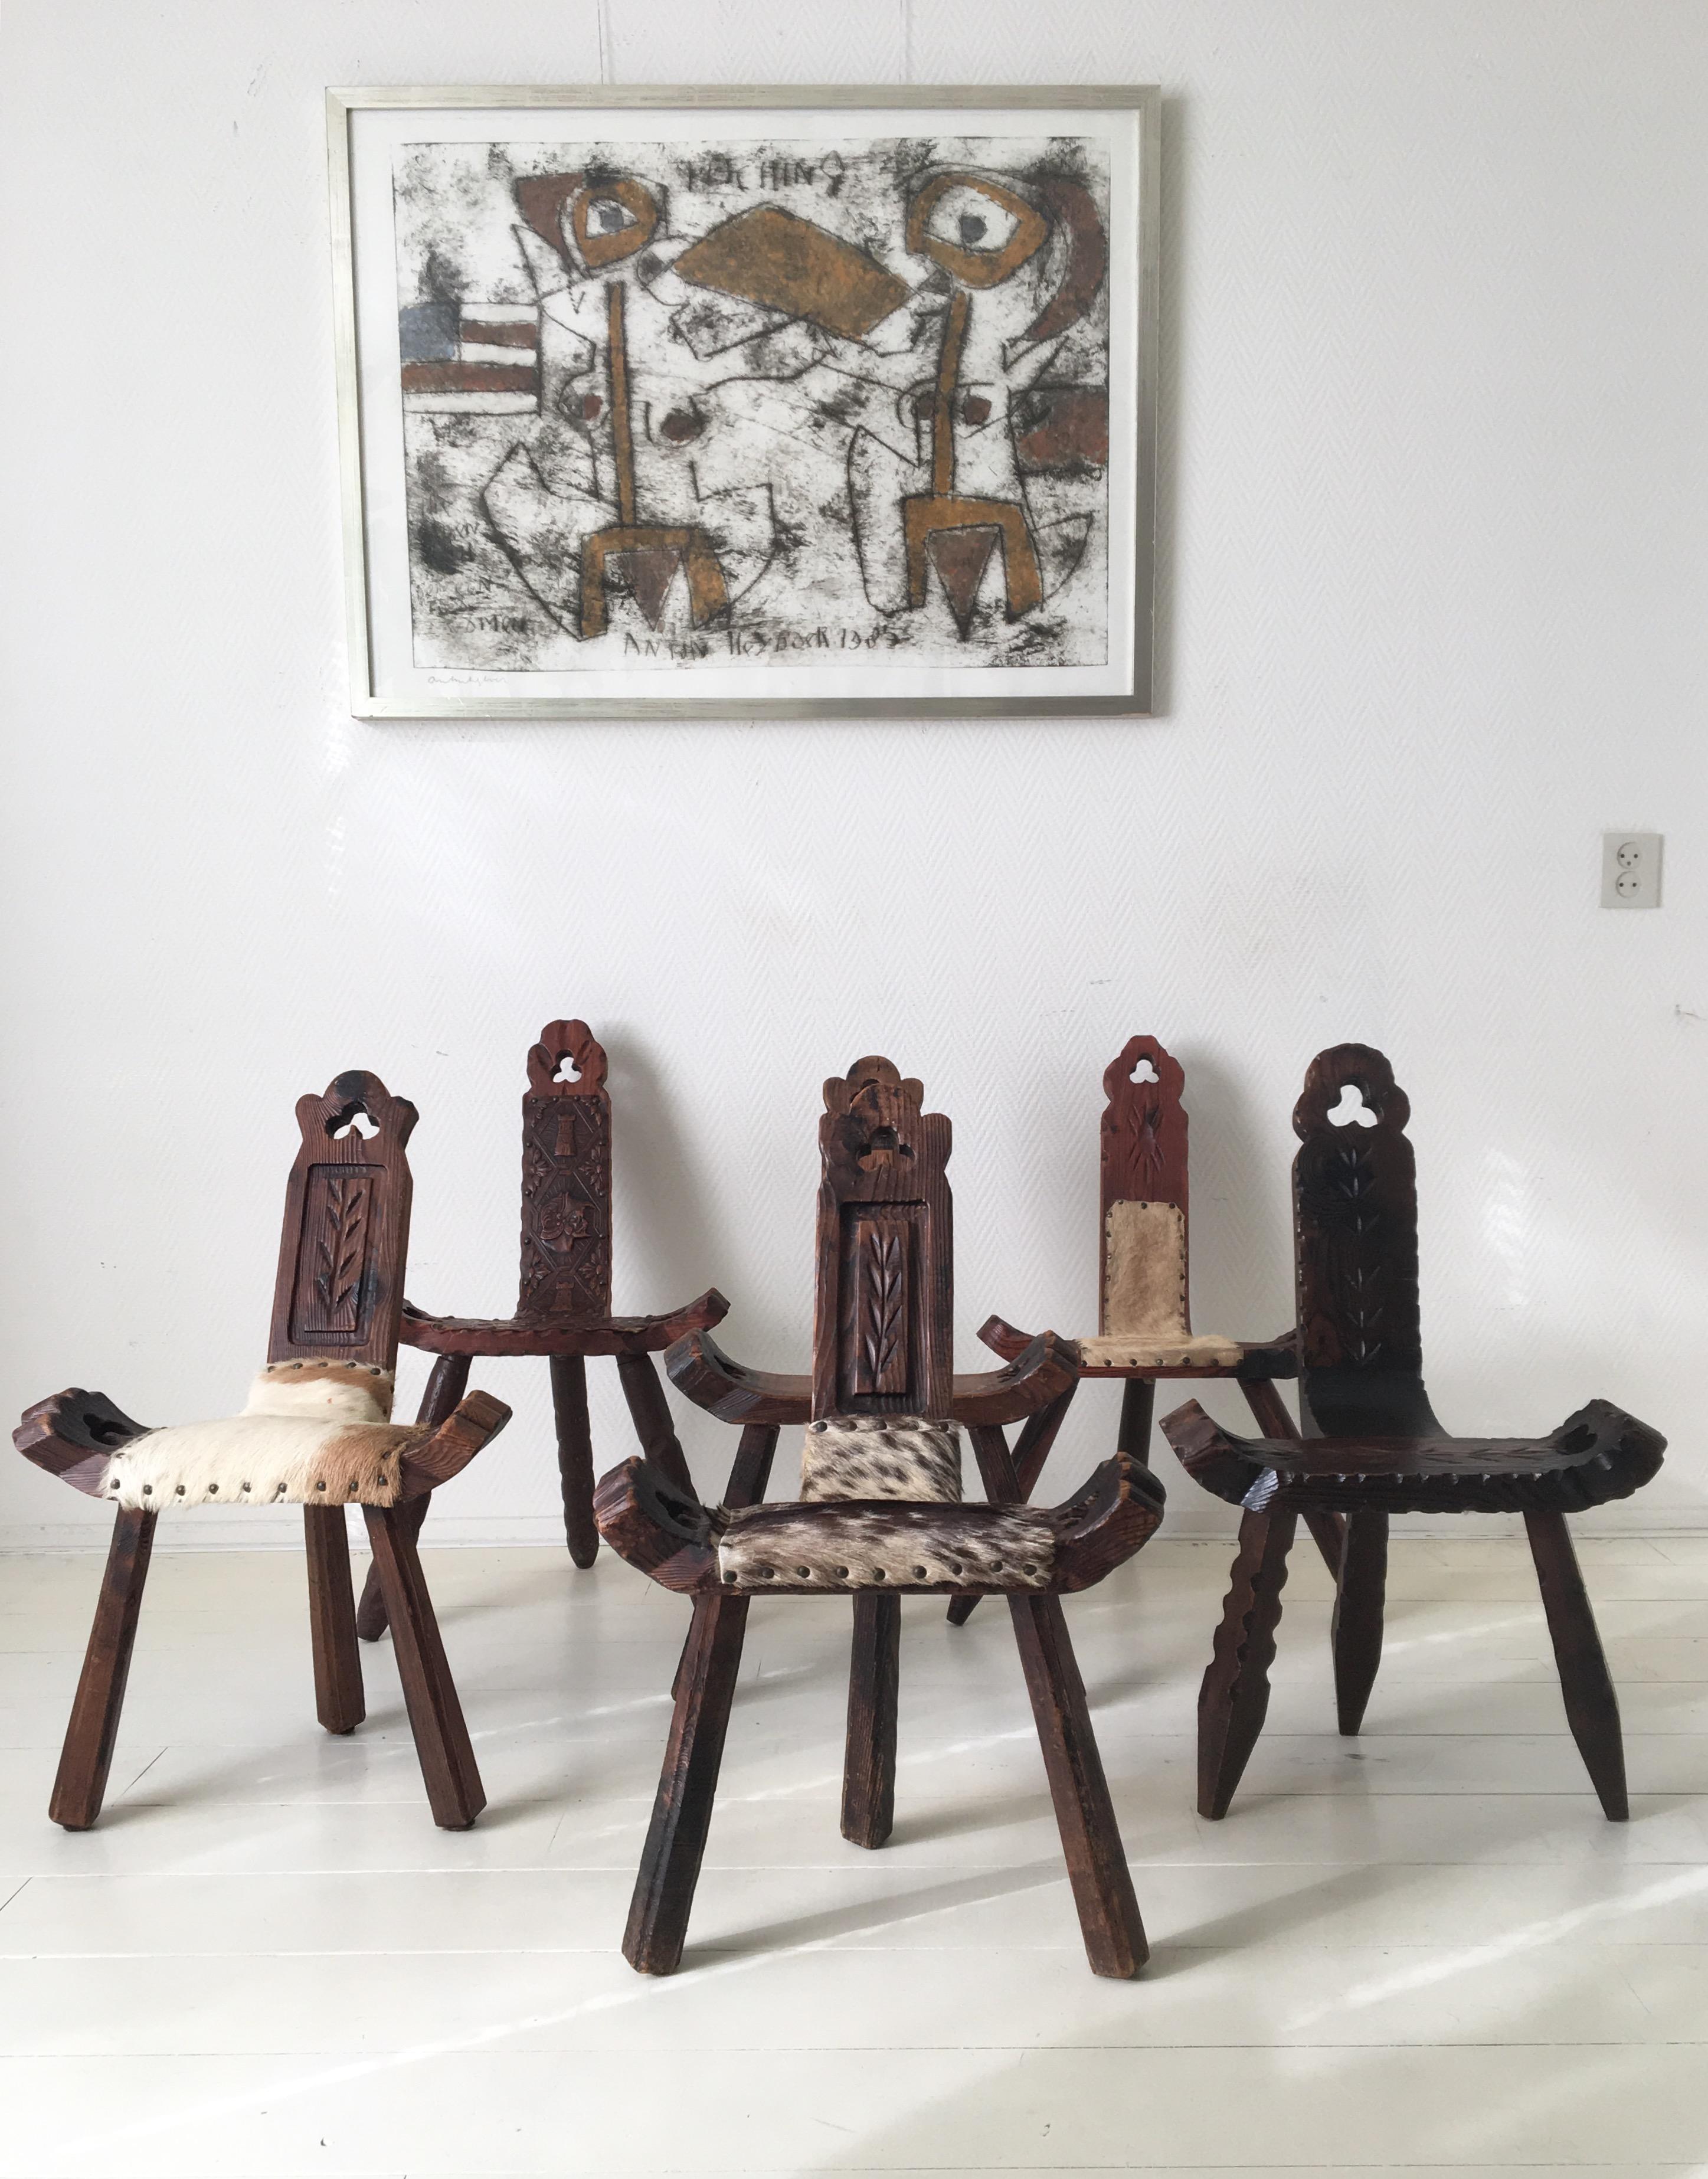 Carved Midcentury Brutalist Spanish Stools, Chairs